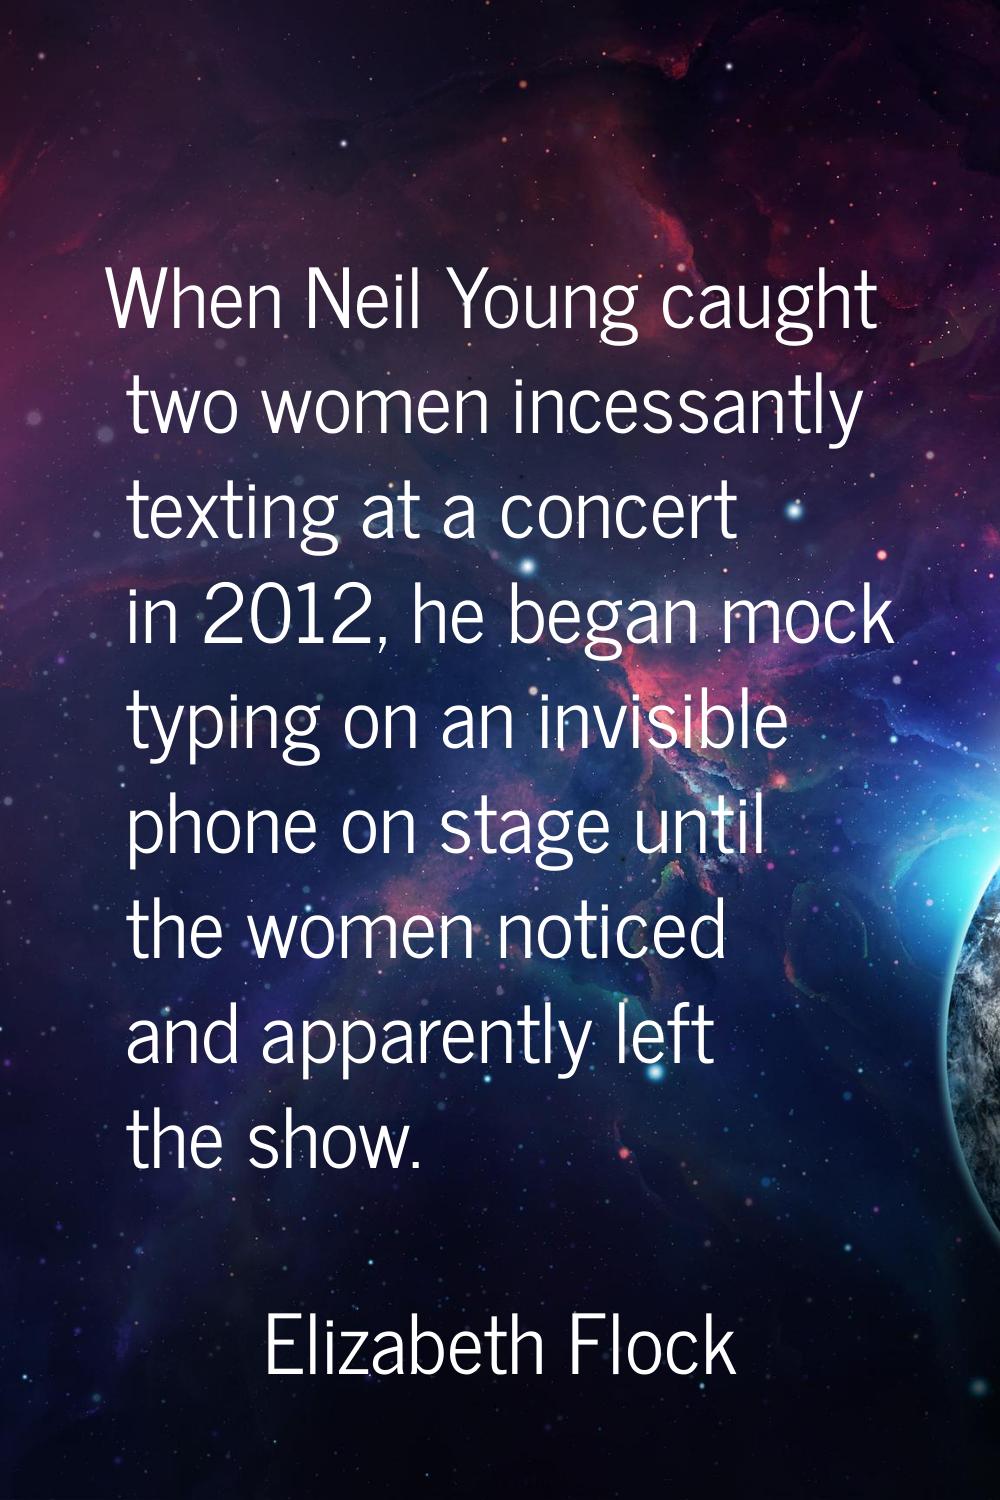 When Neil Young caught two women incessantly texting at a concert in 2012, he began mock typing on 